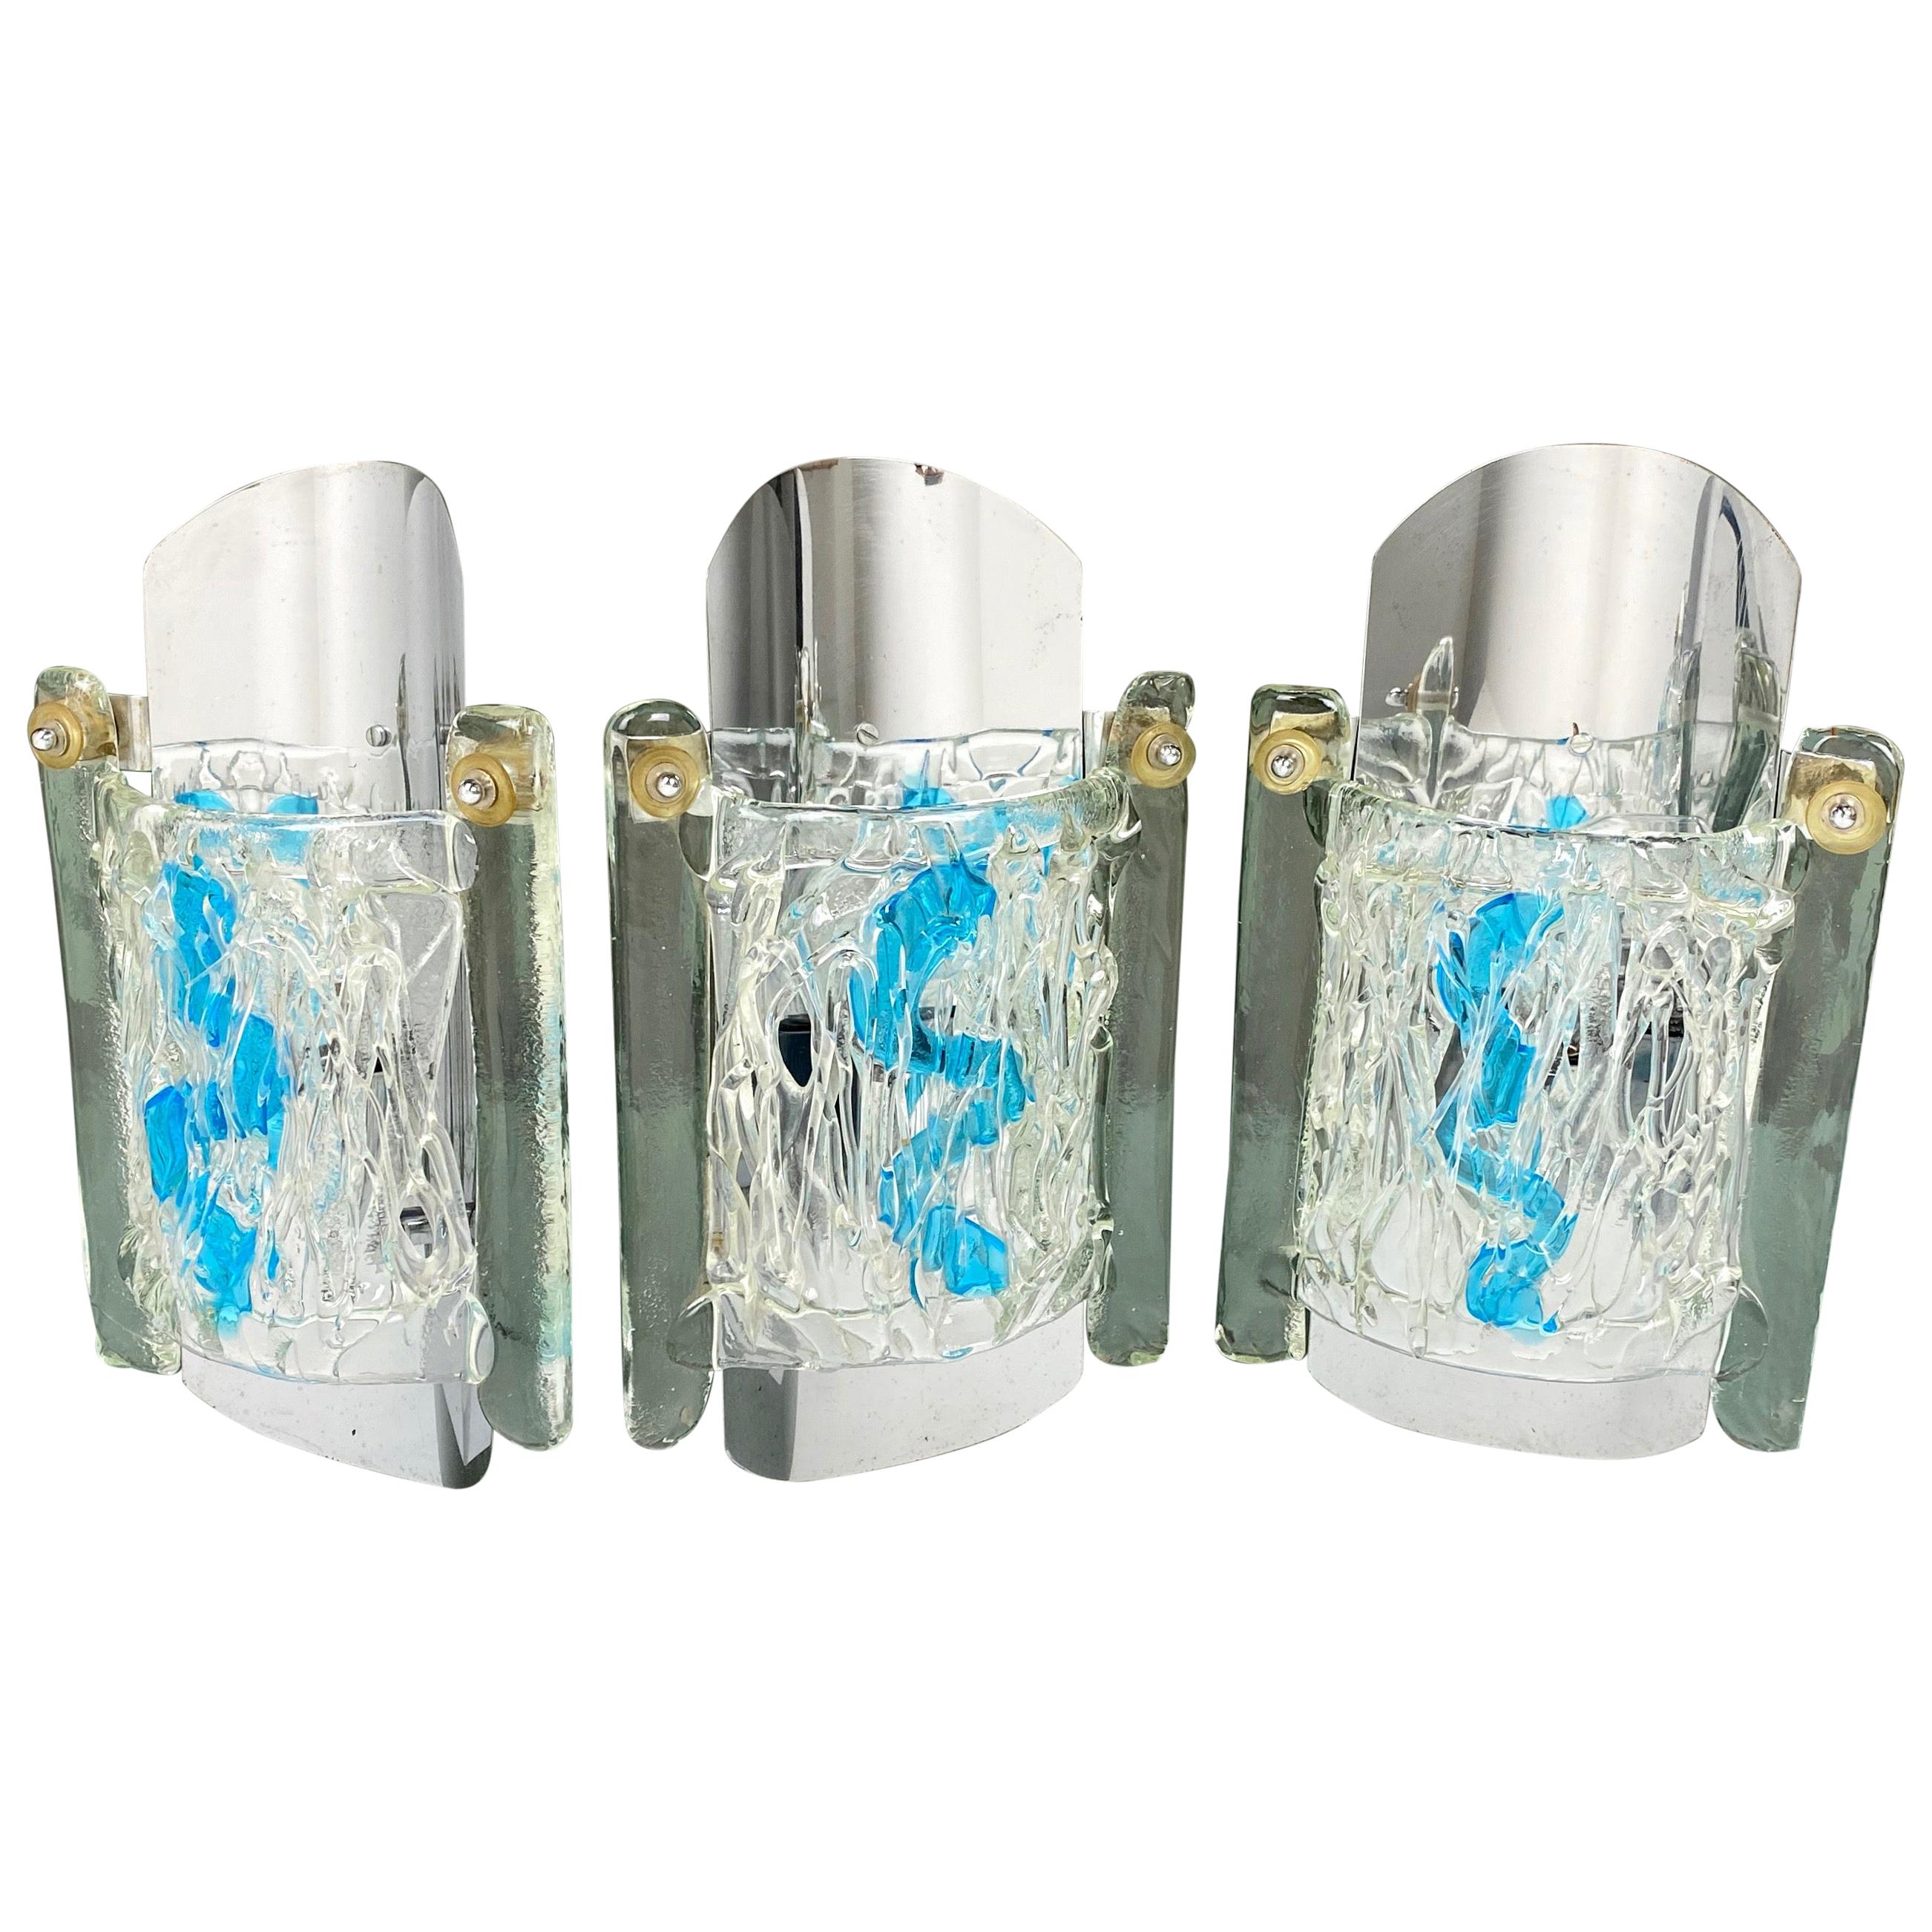 Set of 3 Wall Lamp Sconces Chrome and Murano Glass Blue by Mazzega, Italy, 1970s For Sale